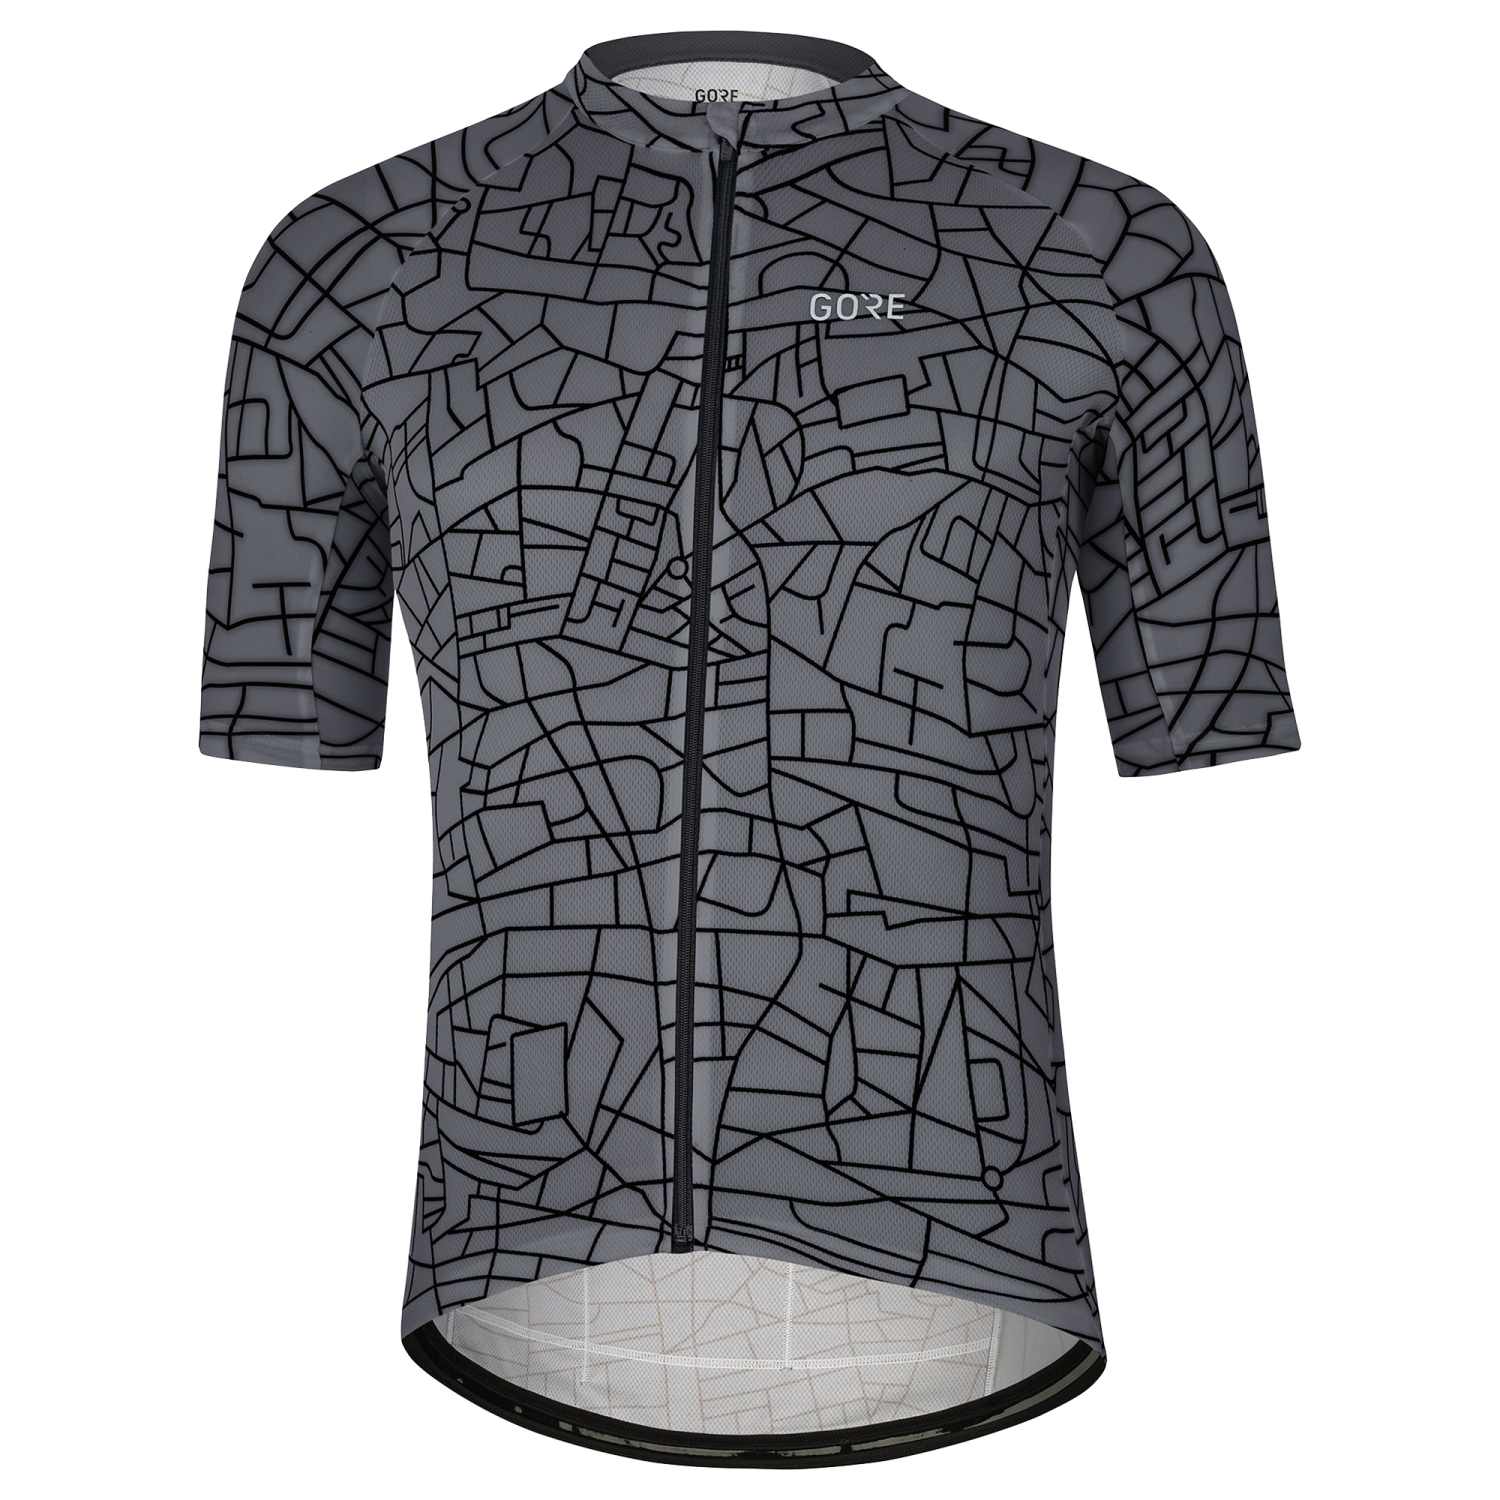 GOREWEAR Gotham Cycling Jersey Men's in Graystone/Black | Small | Form fit